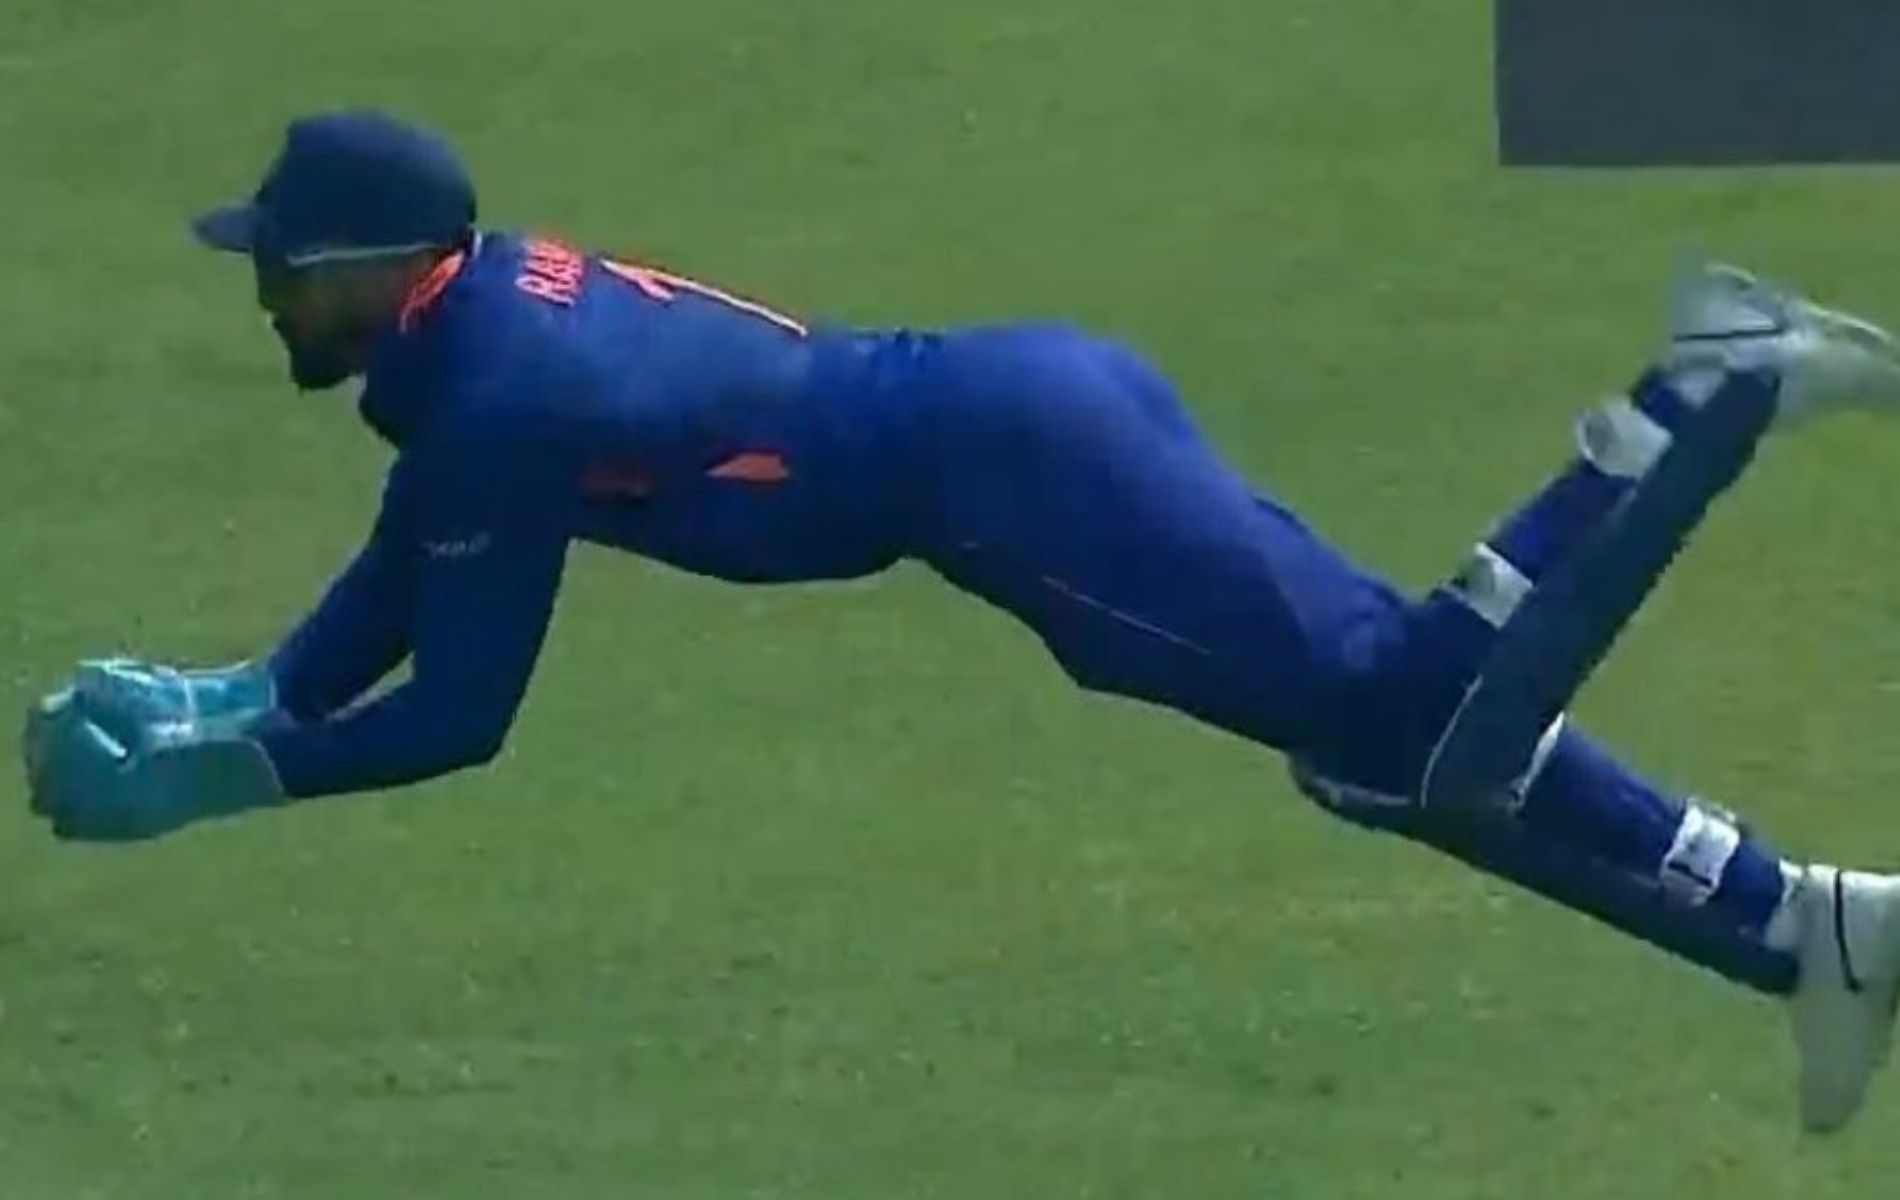 KL Rahul dived to his right to complete the catch. (Pic: BCCI)